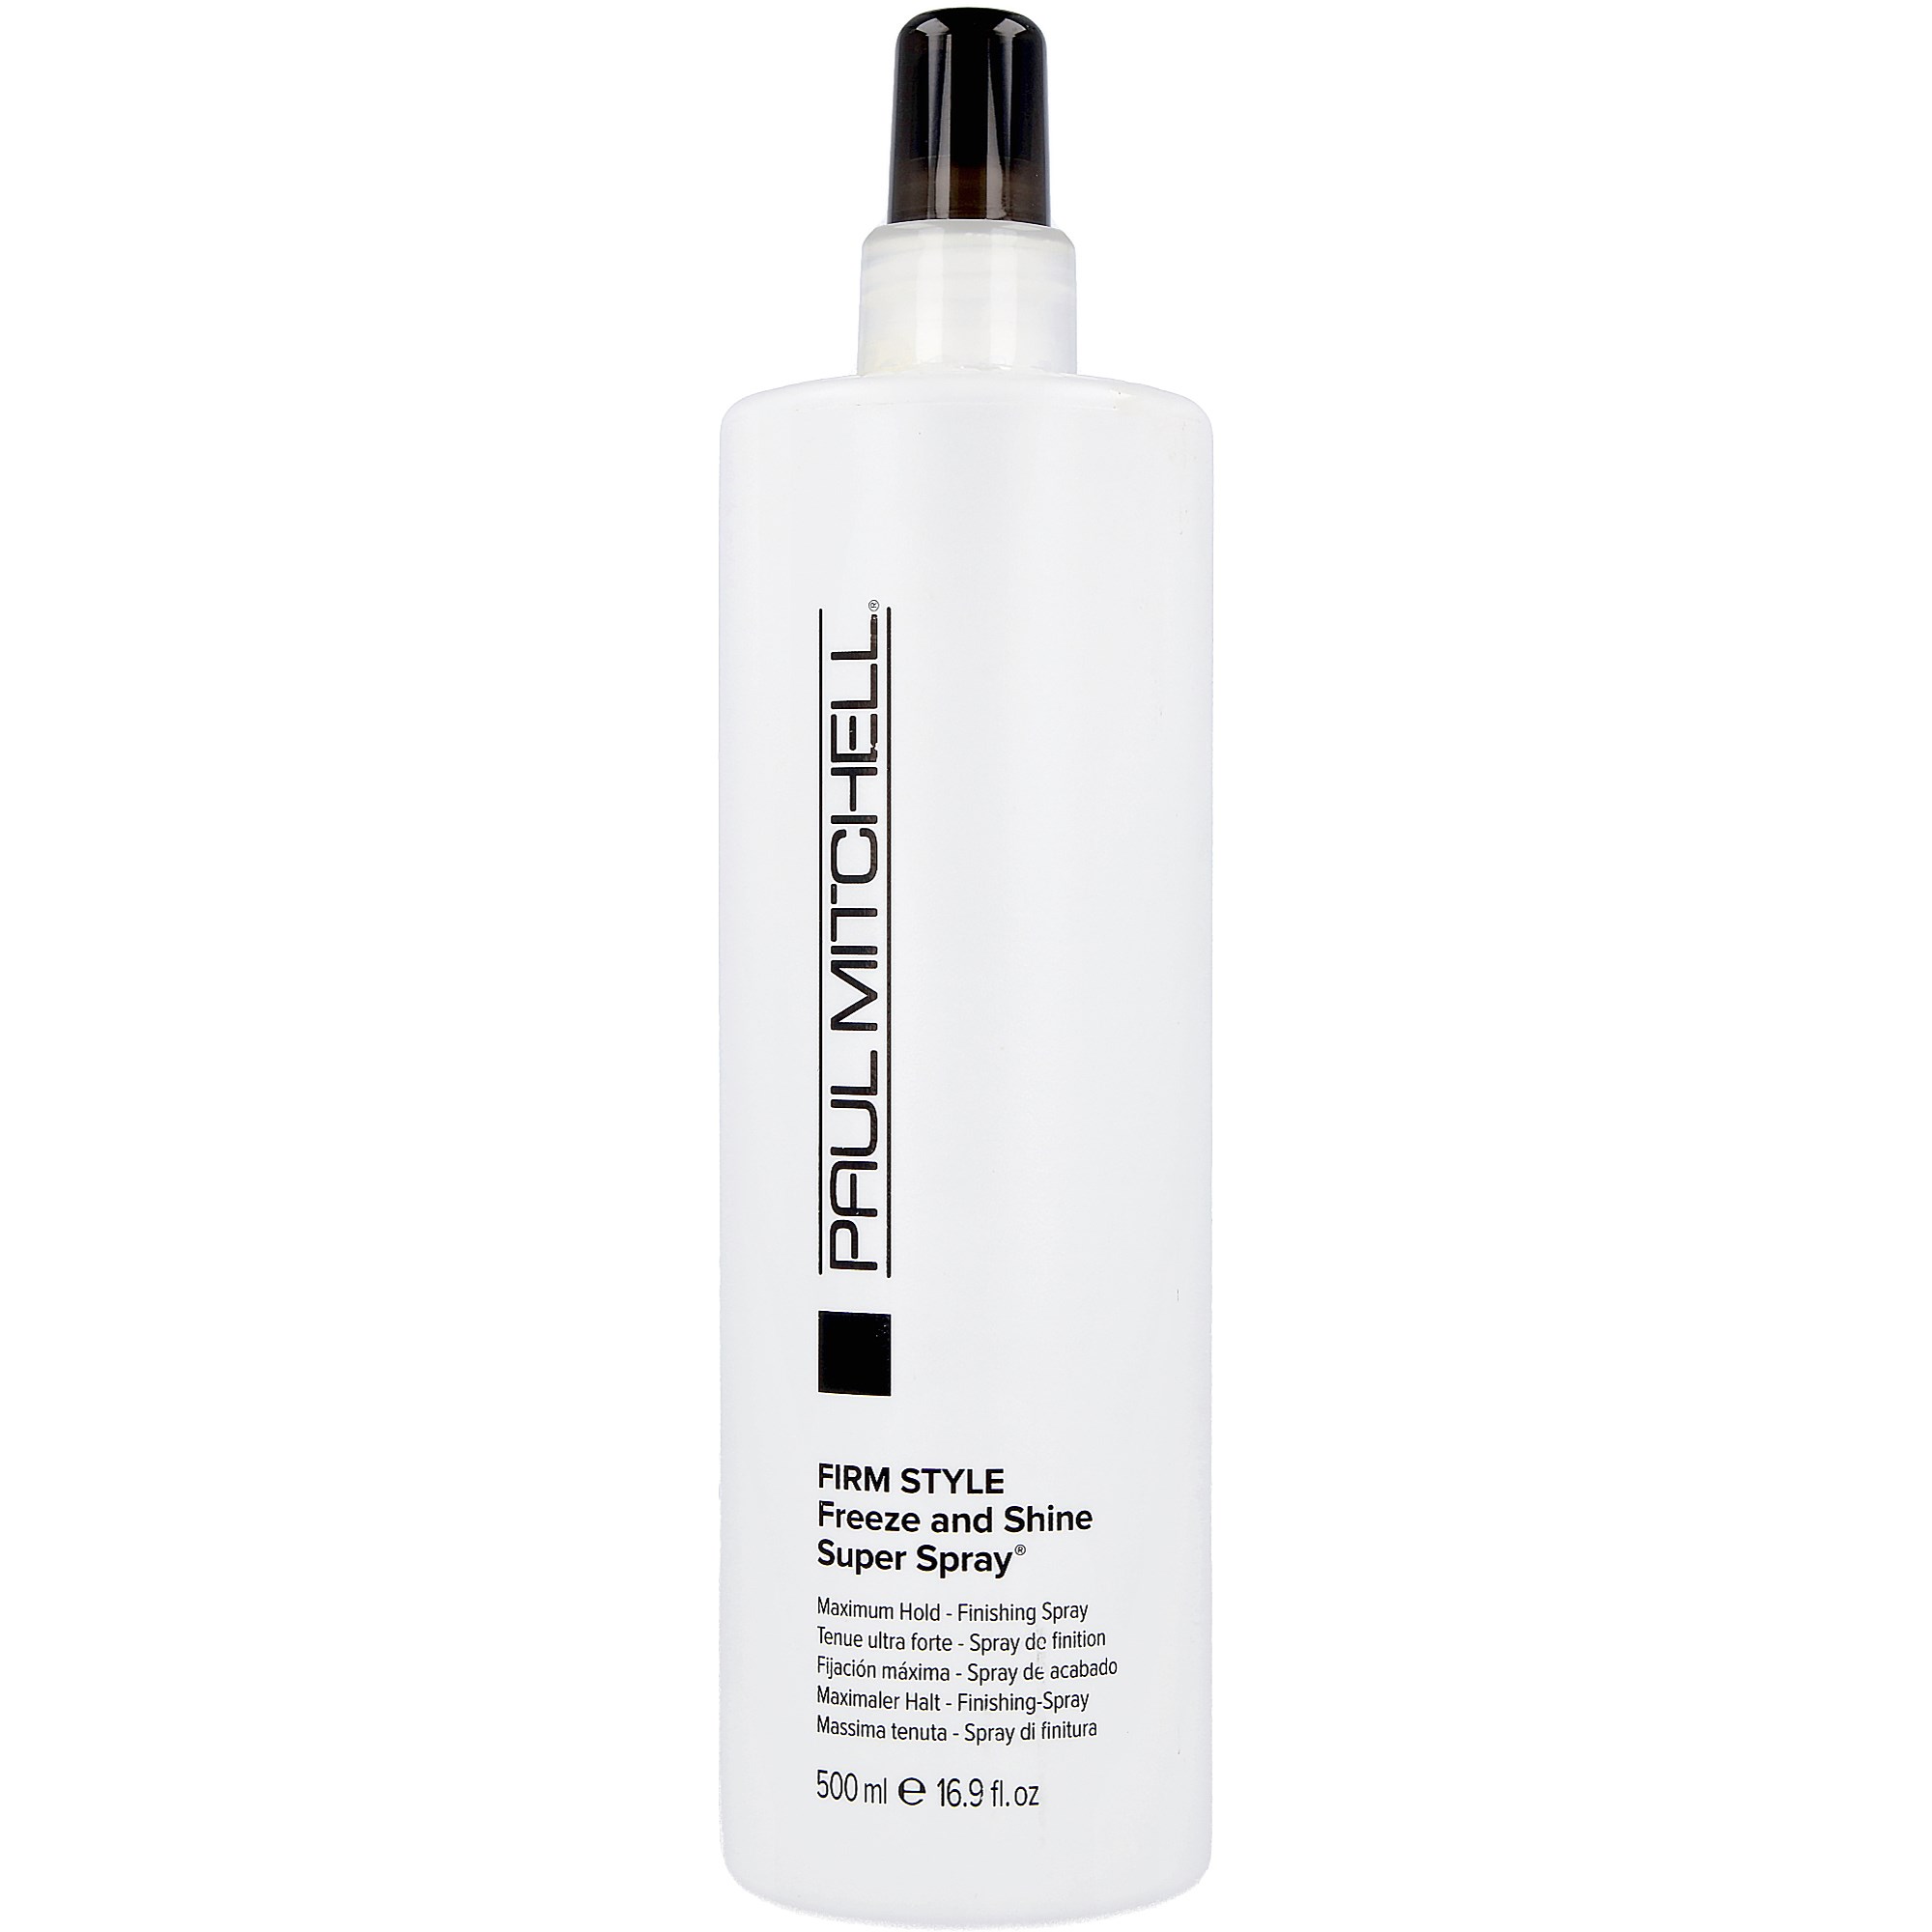 Paul Mitchell Firm Style Feeze and Shine Super Spray 500 ml